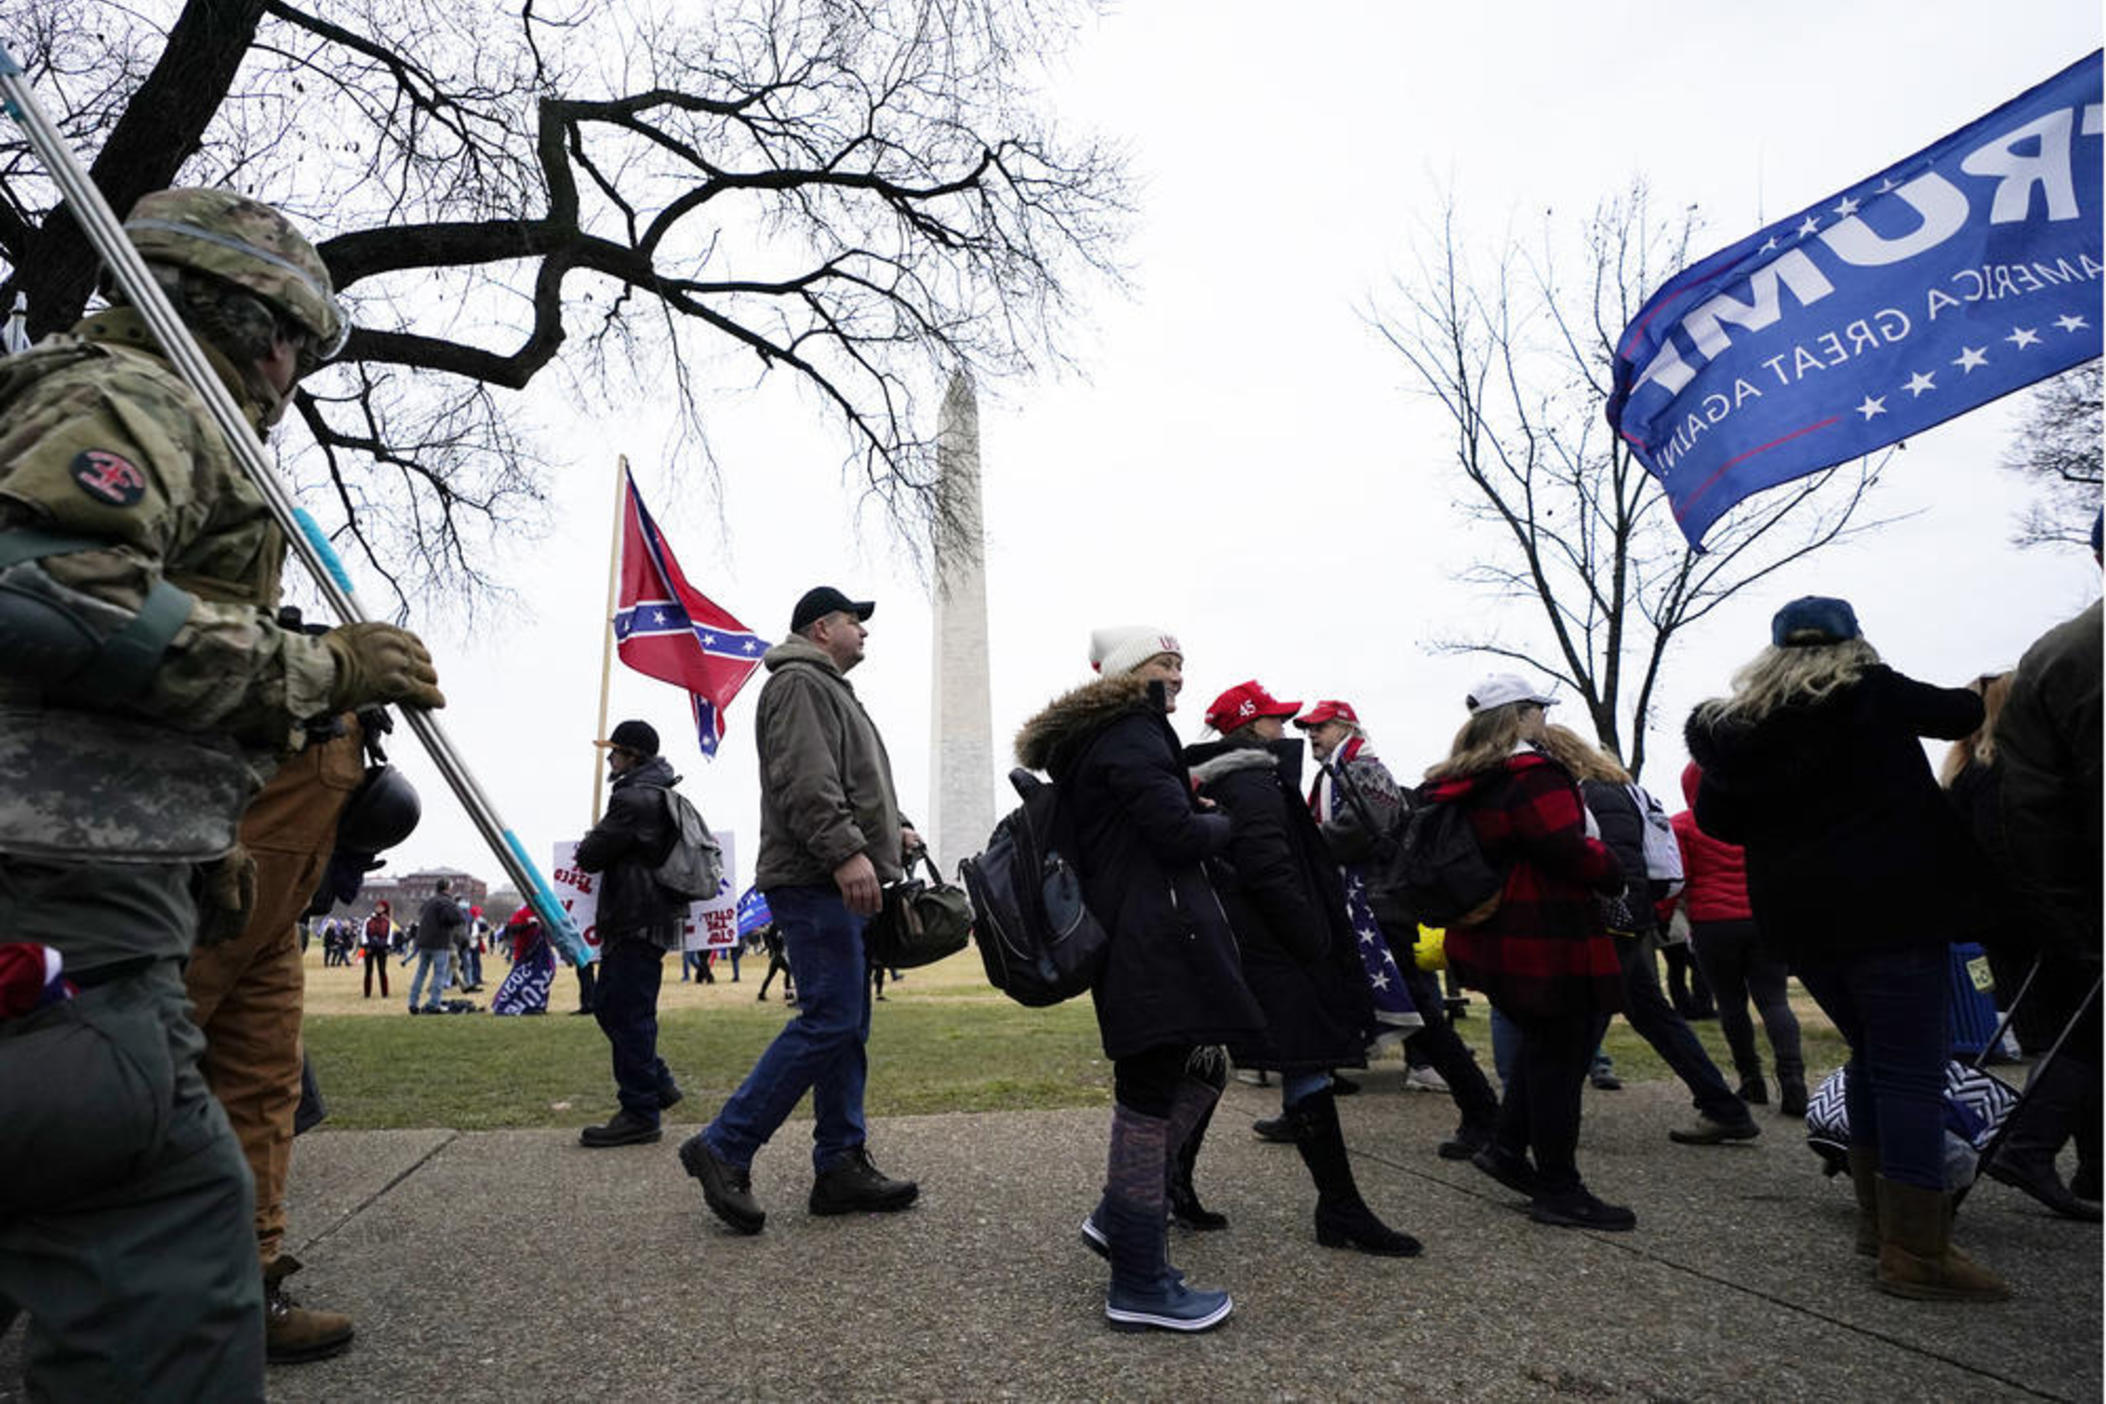 In this Wednesday, Jan. 6, 2021 file photo Trump supporters gather on the Washington Monument grounds in advance of a rally in Washington. Both within and outside the walls of the Capitol, banners and symbols of white supremacy and anti-government extremism were displayed as an insurrectionist mob swarmed the U.S. Capitol.